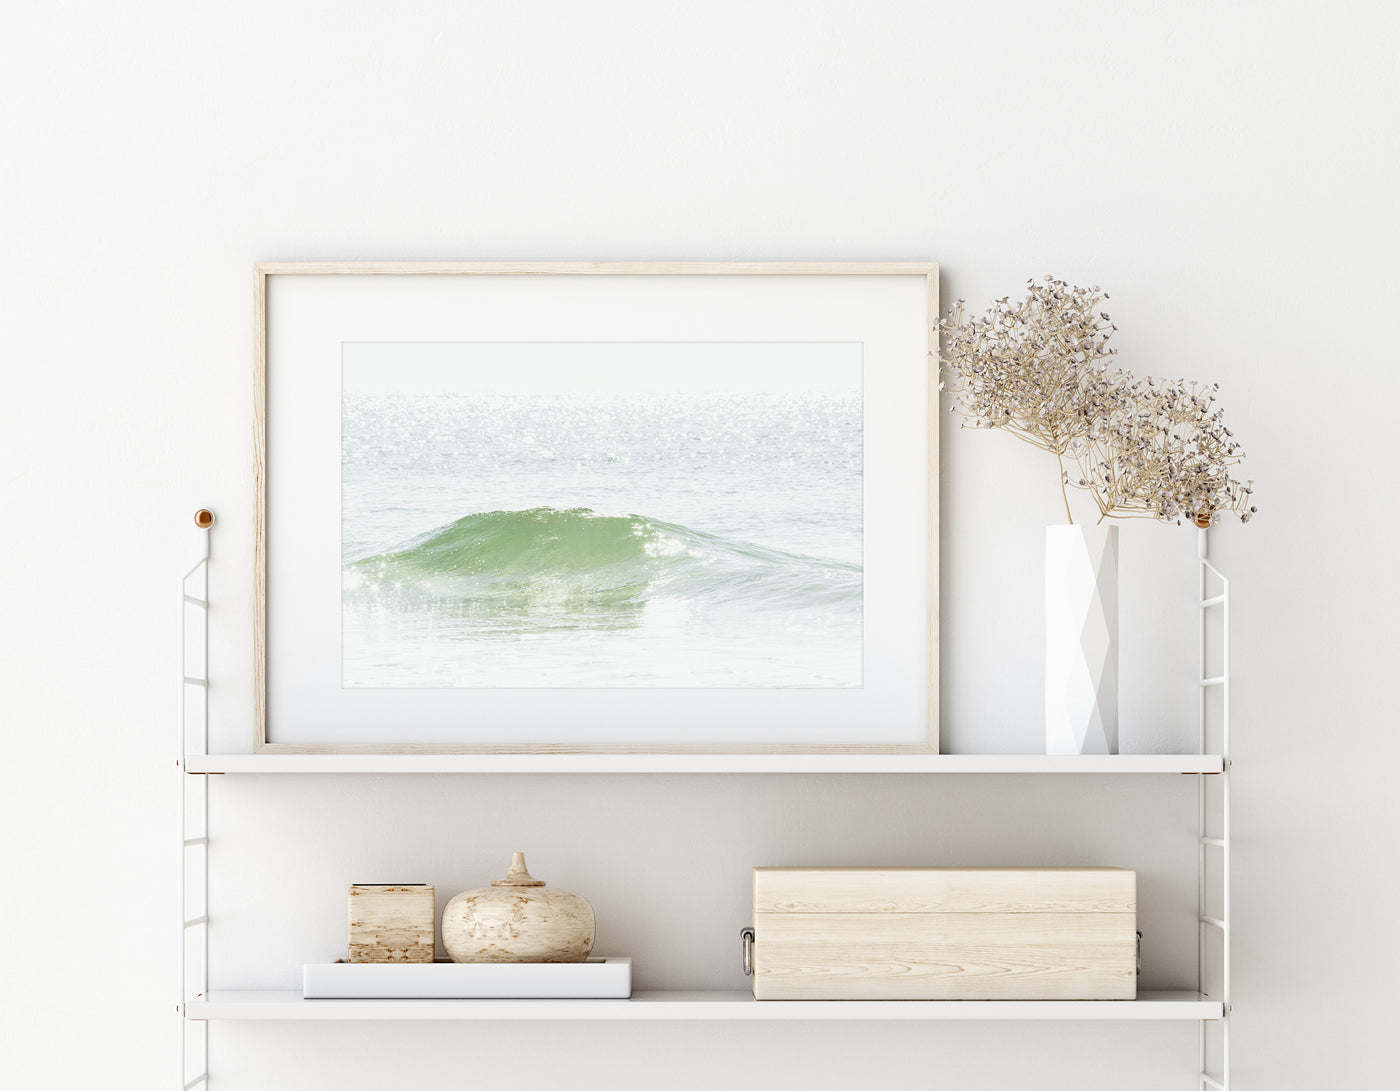 Ocean Waves No 3 - Sea scape wall art by Cattie Coyle Photography on string shelf